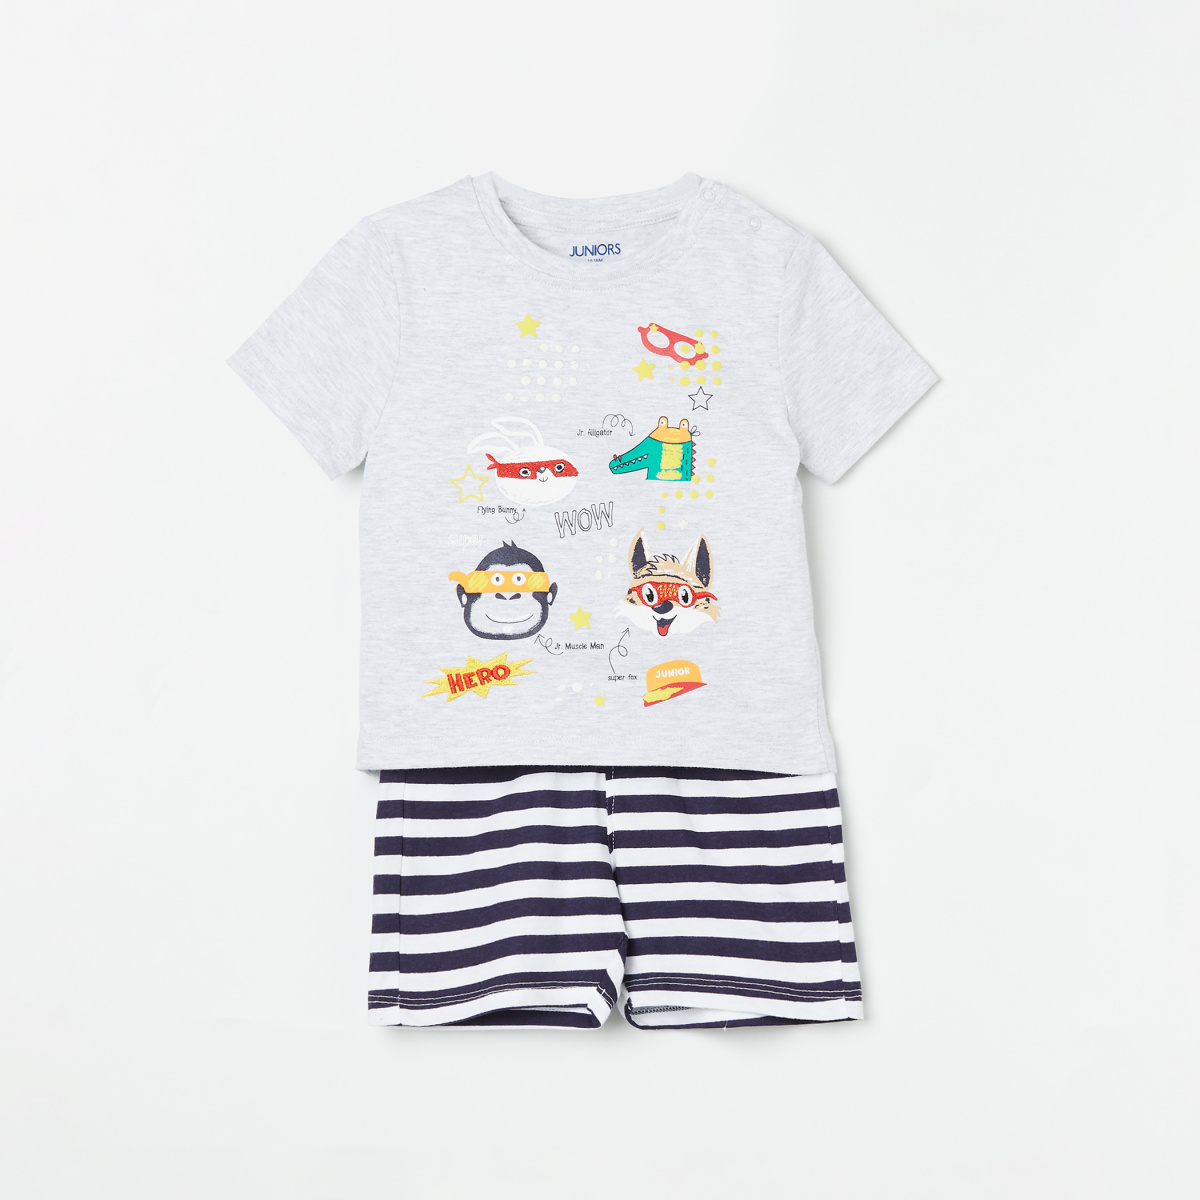 JUNIORS Boys Printed Crew Neck T-shirt with Striped Shorts